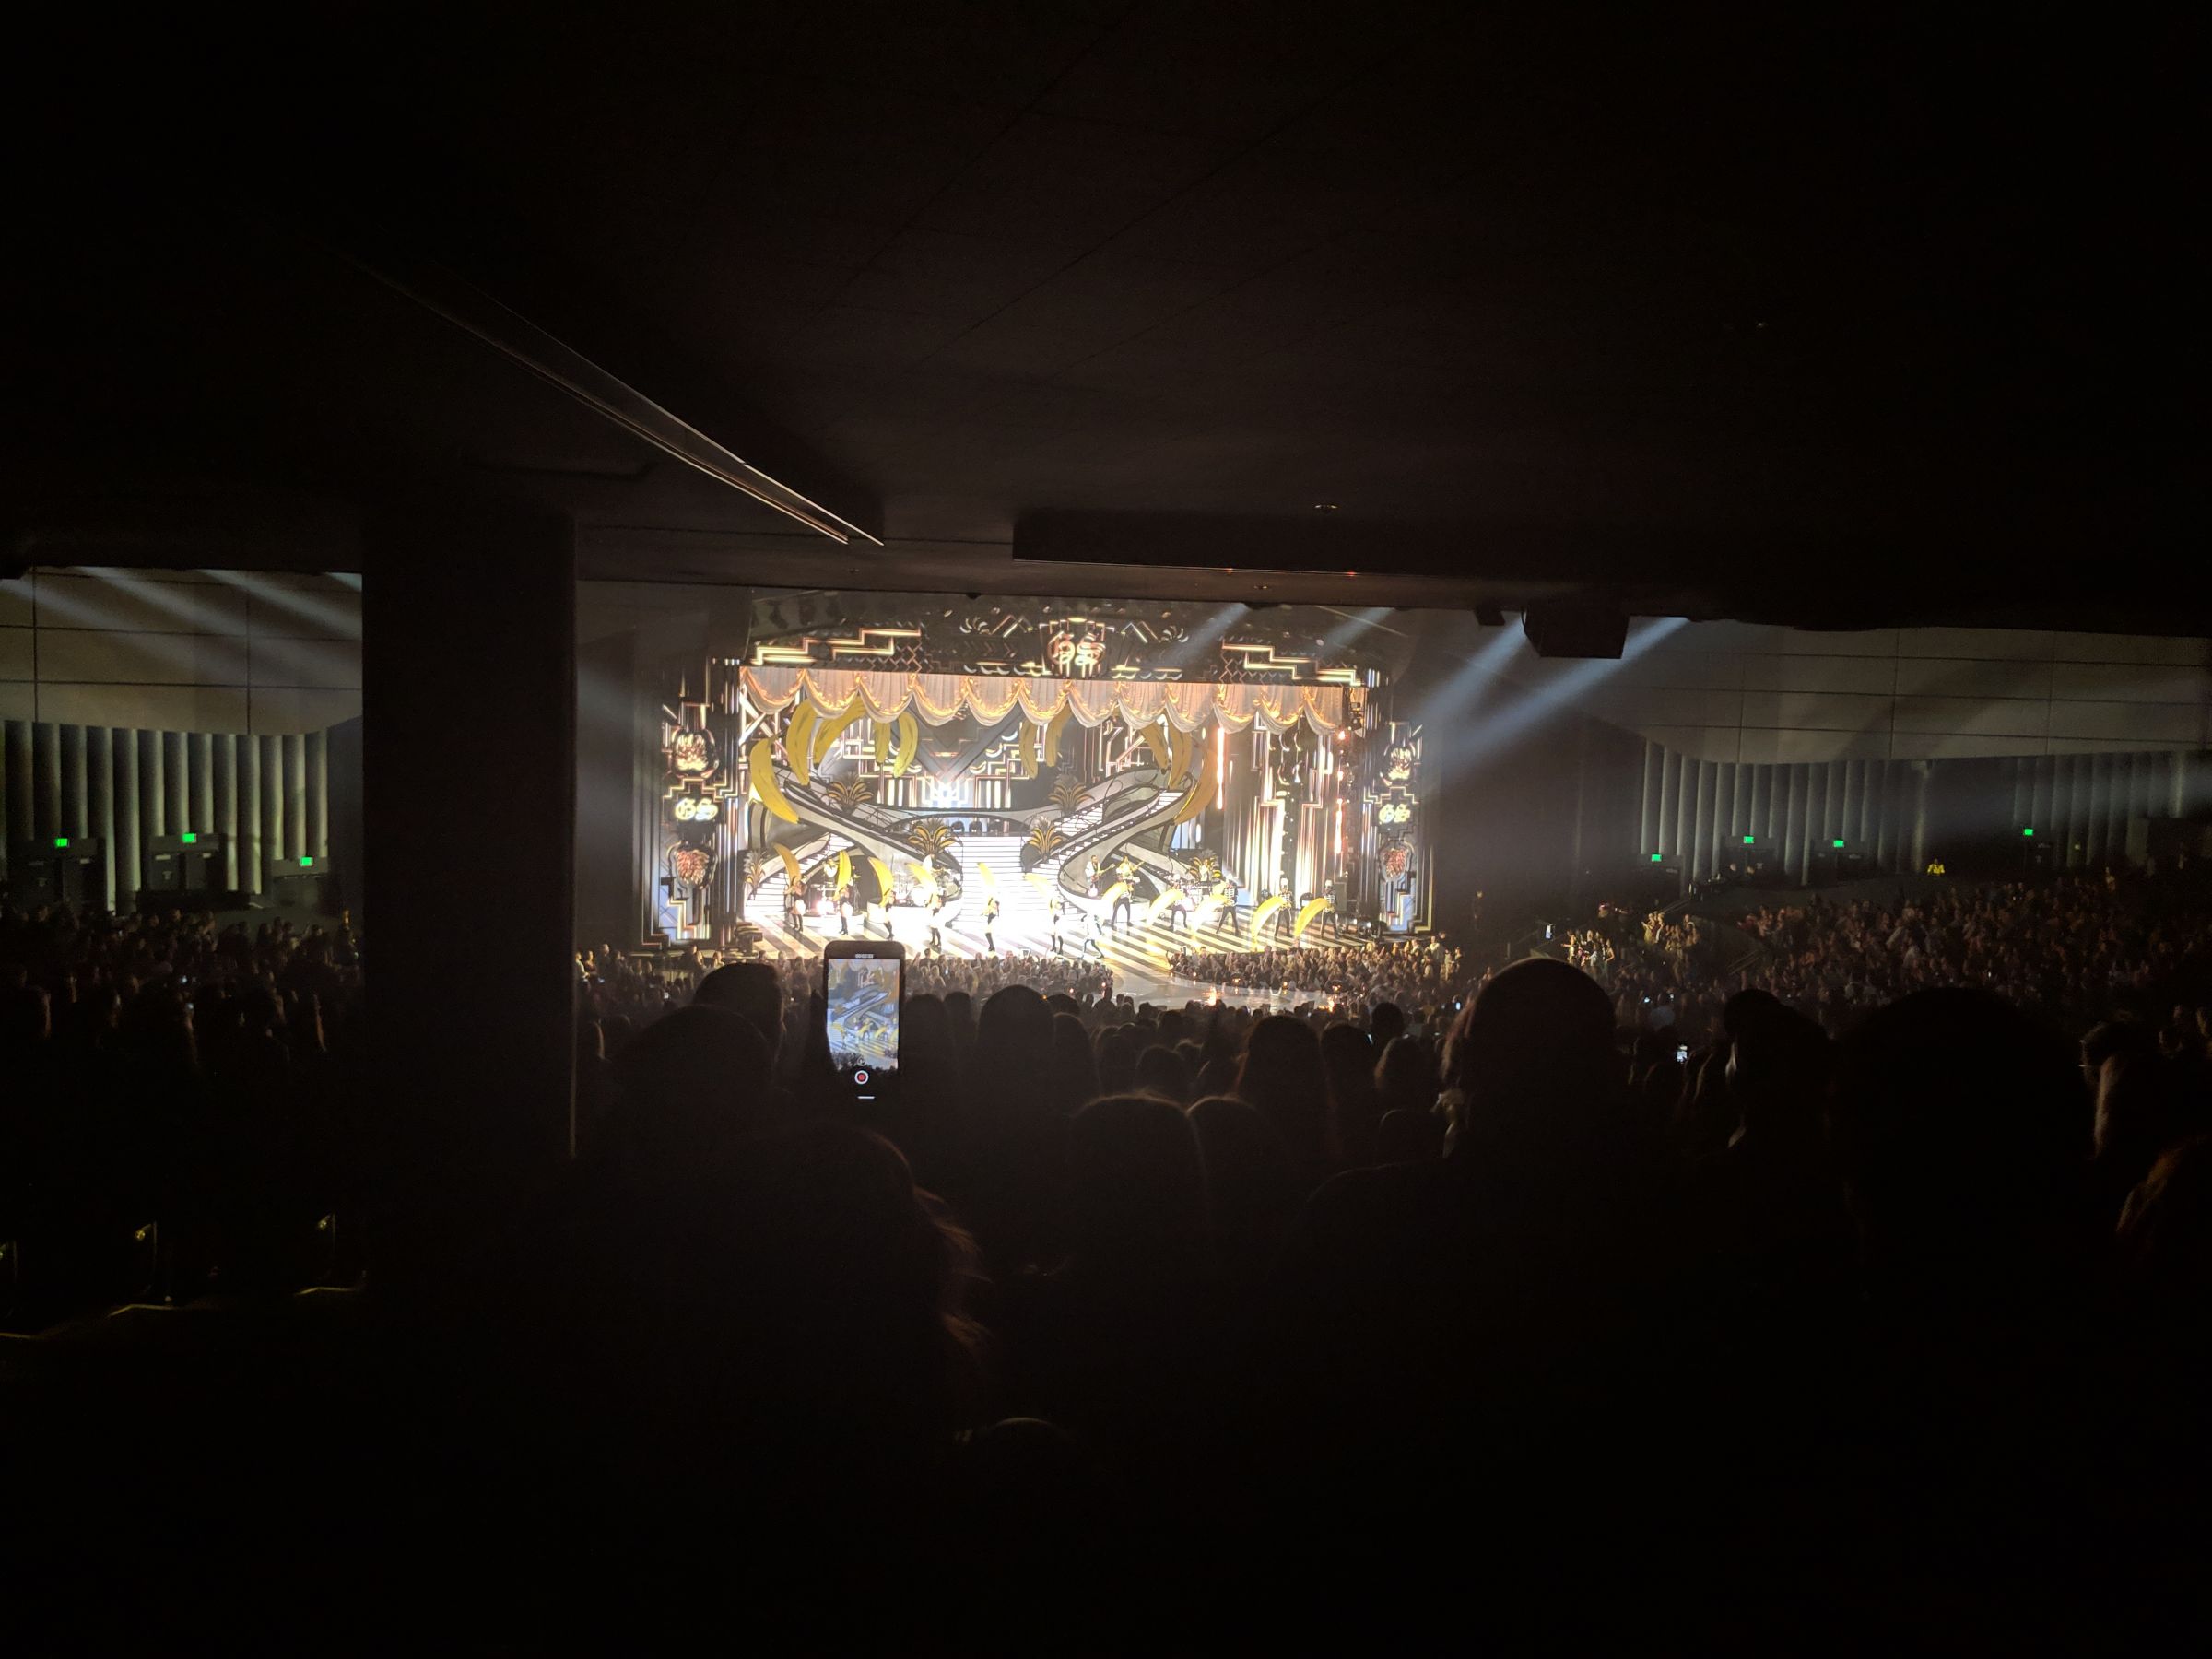 section 206, row bb seat view  - bakkt theater at planet hollywood